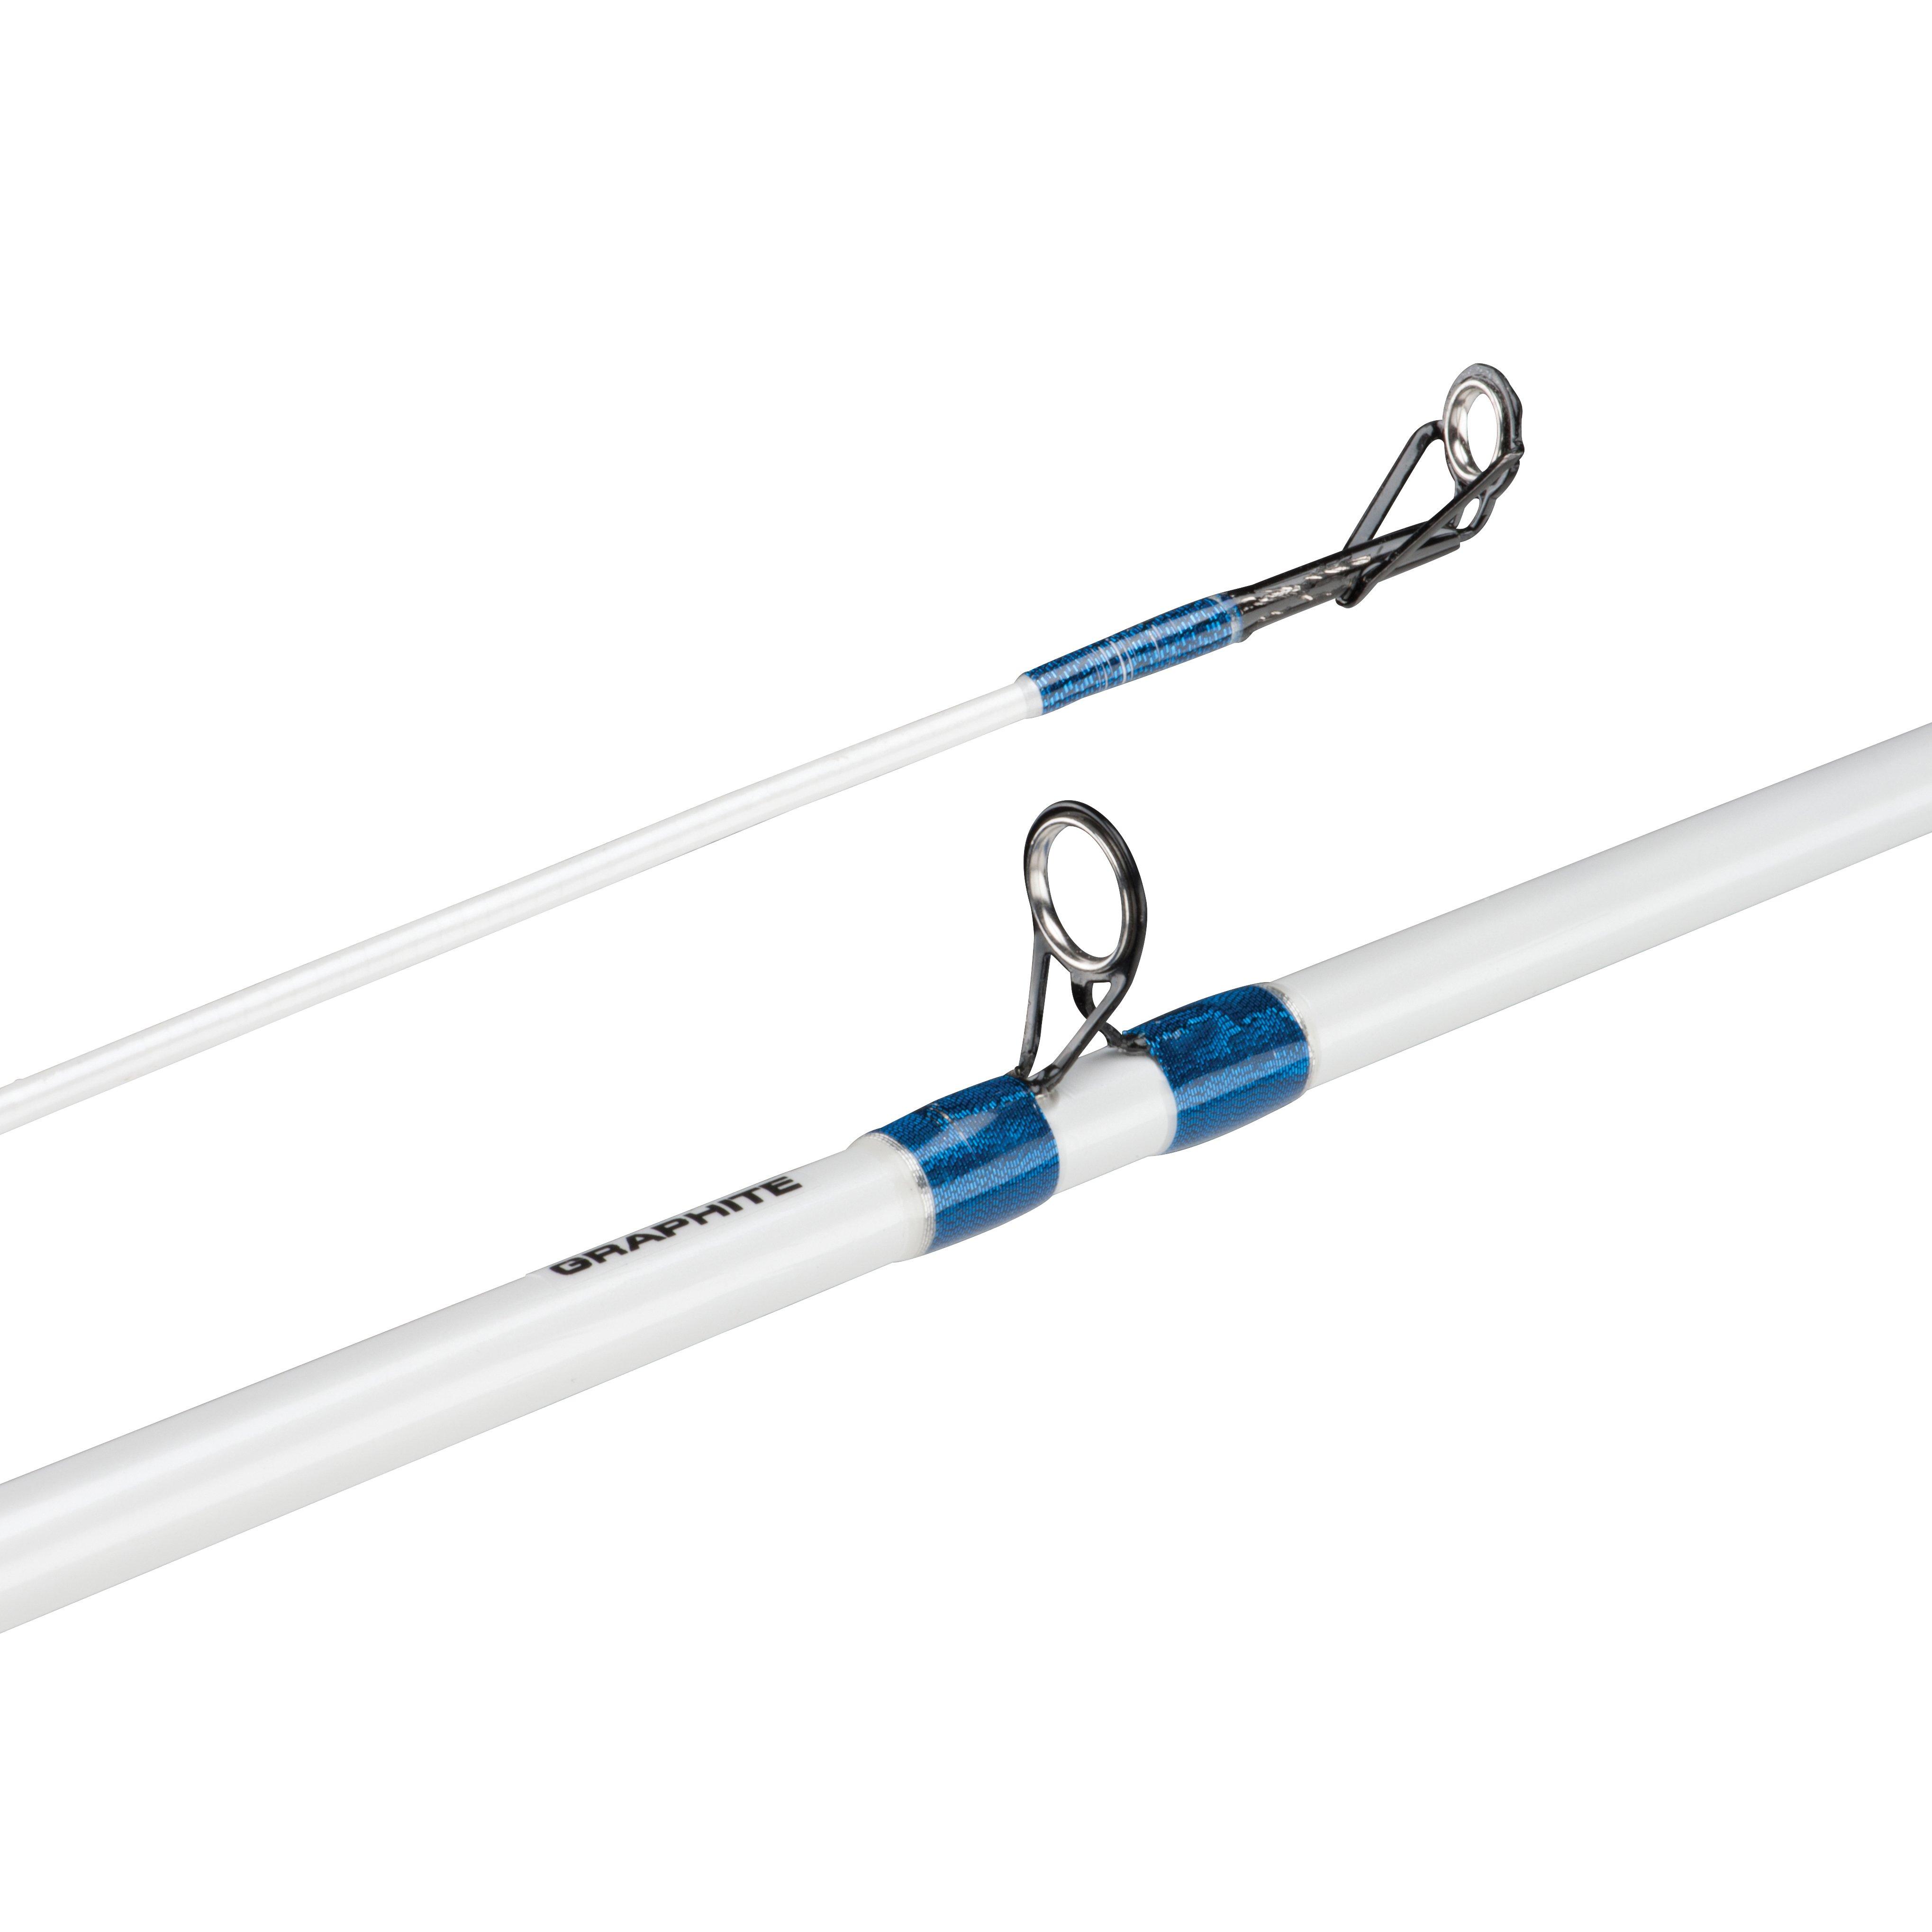 shakespeare fishing pole for Sale,Up To OFF 76%